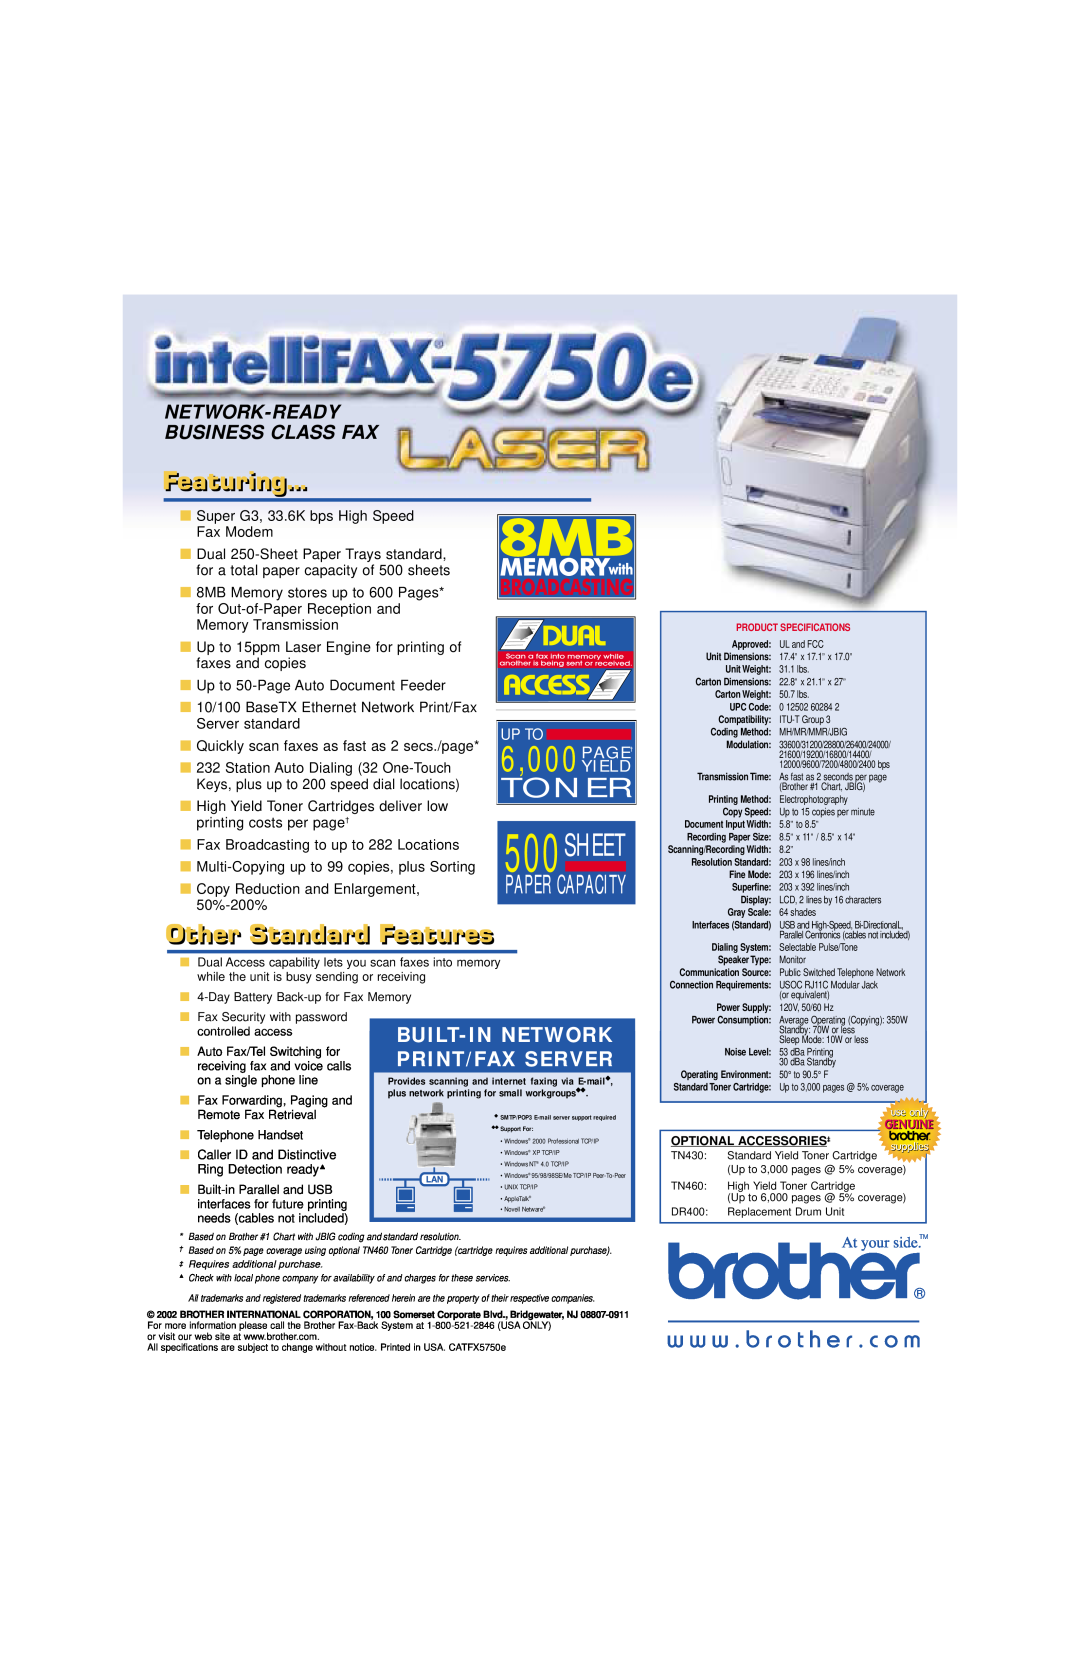 Brother 5750e Featuringi, Other Standard Features, 6,000PAGE†, 500SHEET, Toner, Built-In Network Print/Fax Server, Yield 